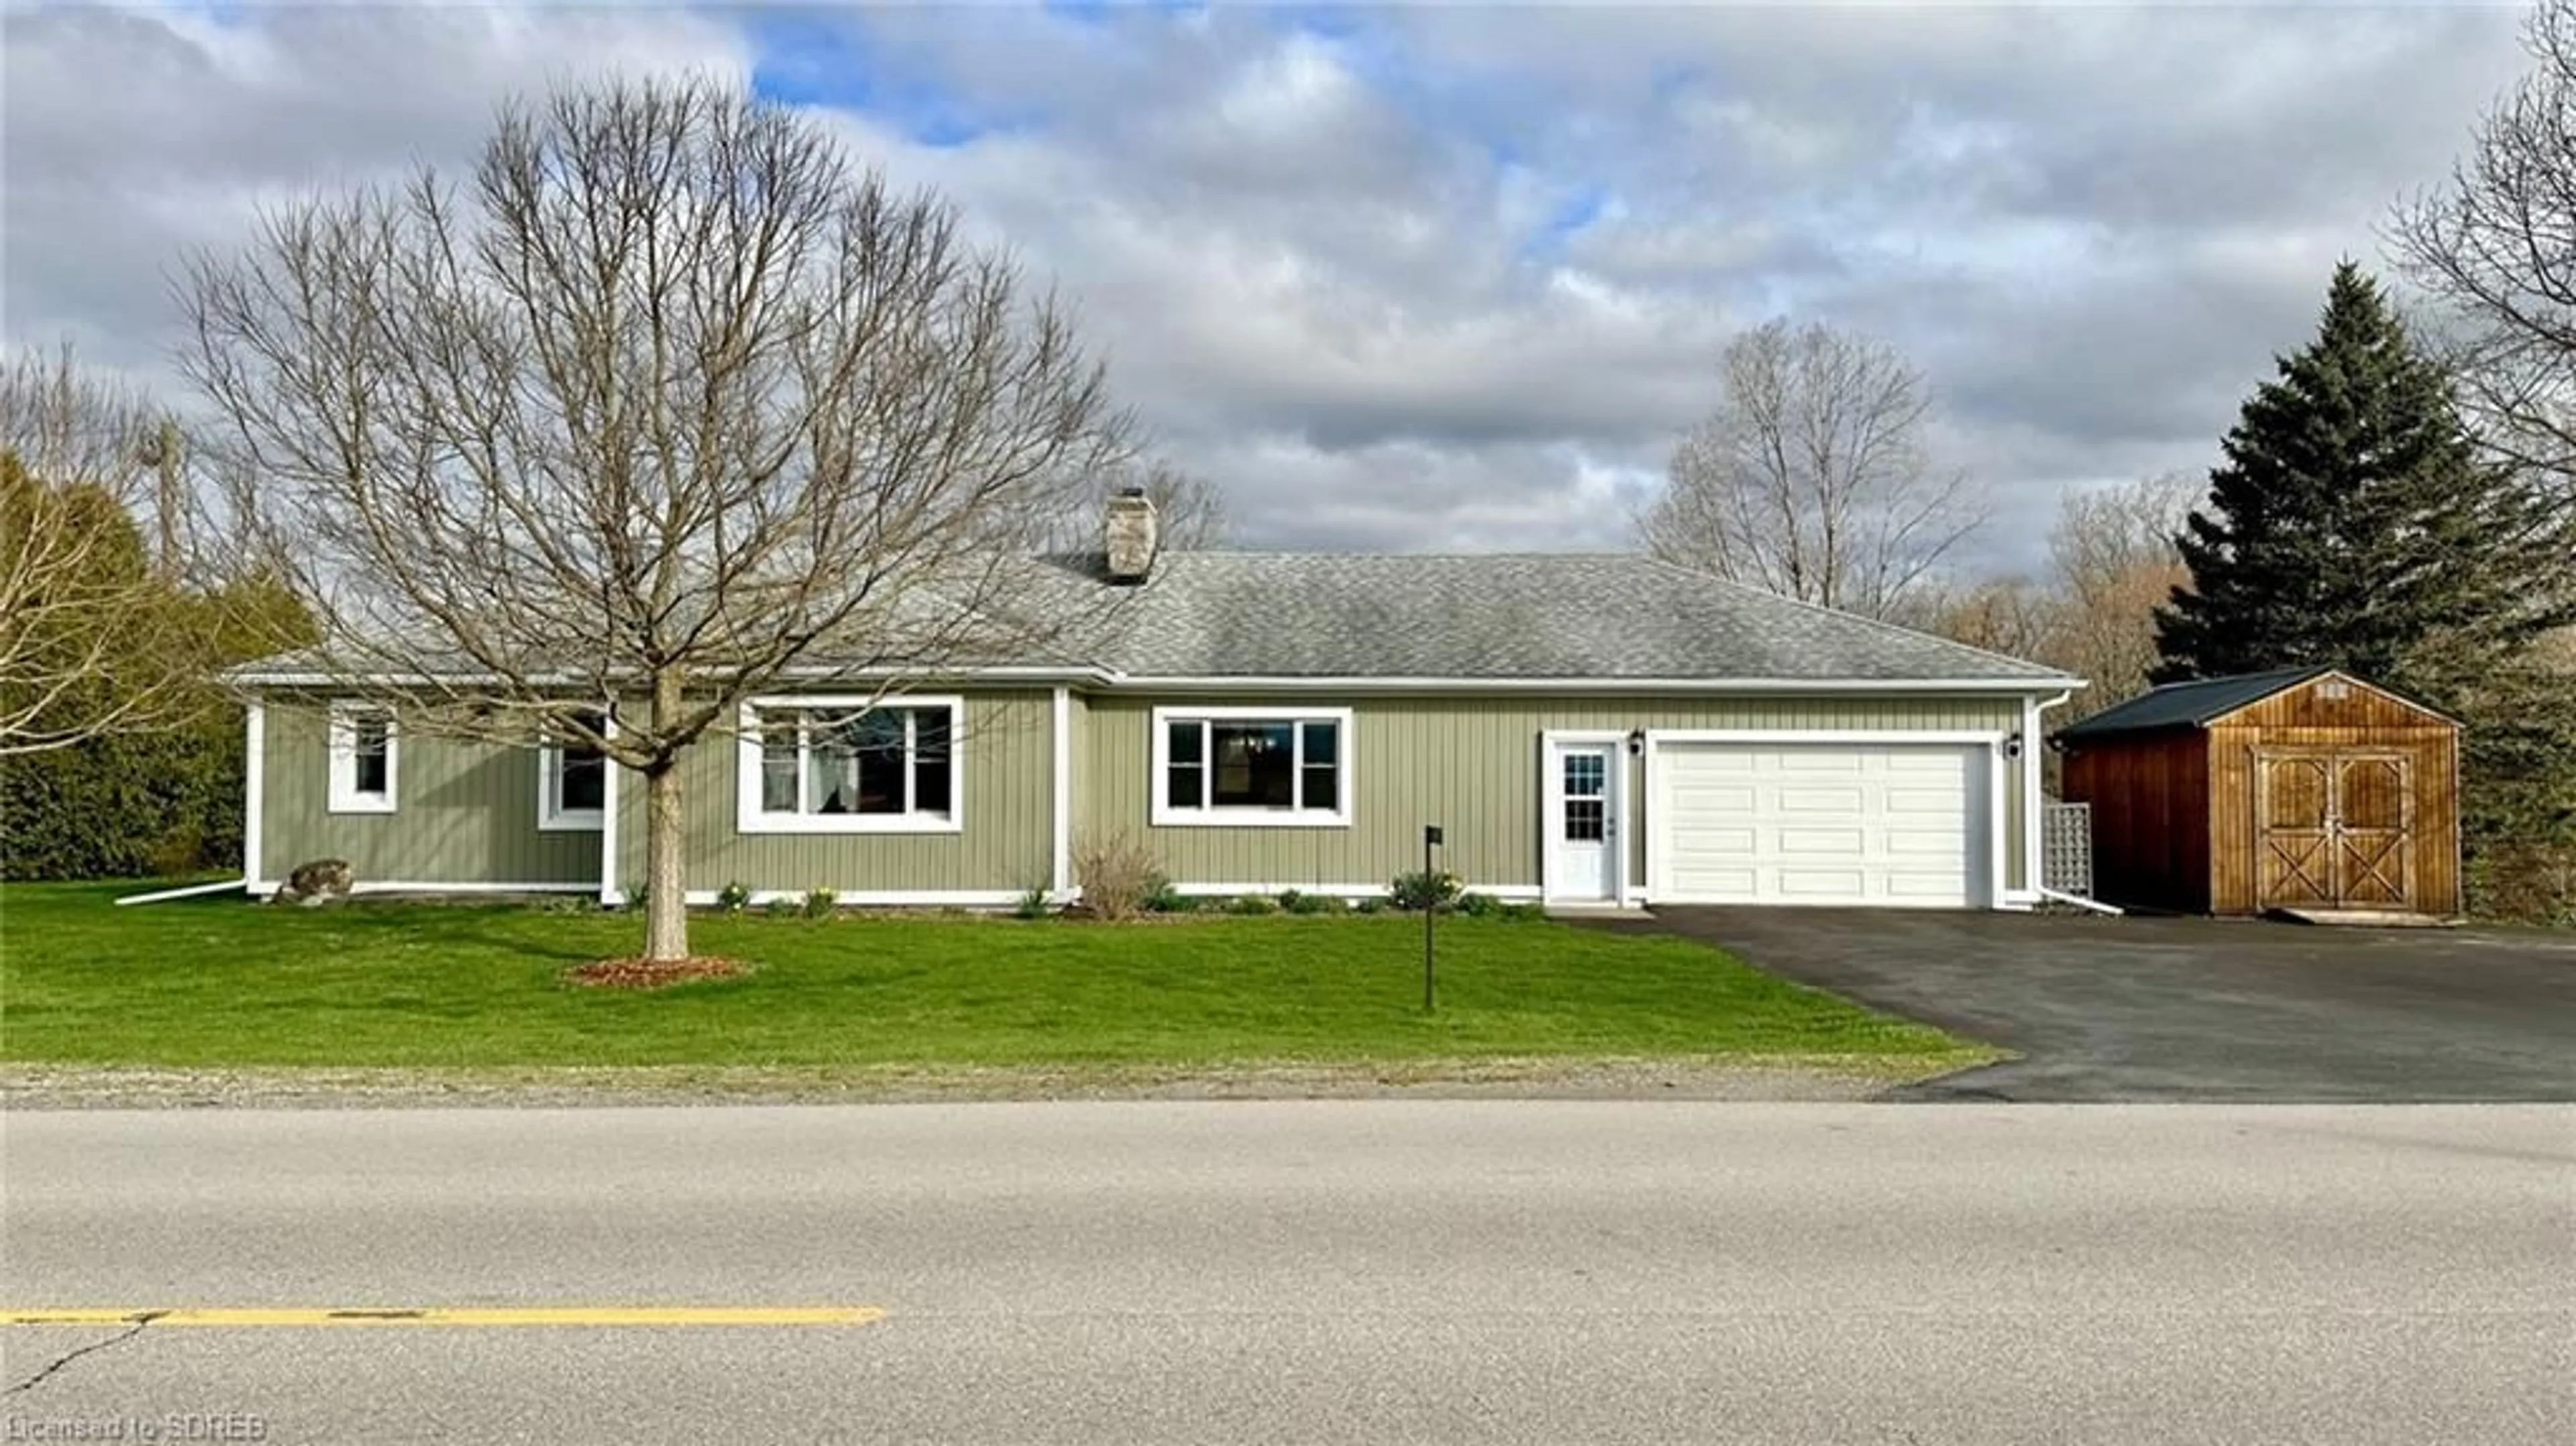 Frontside or backside of a home for 4147 Lakeshore Rd, St. Williams Ontario N0E 1P0